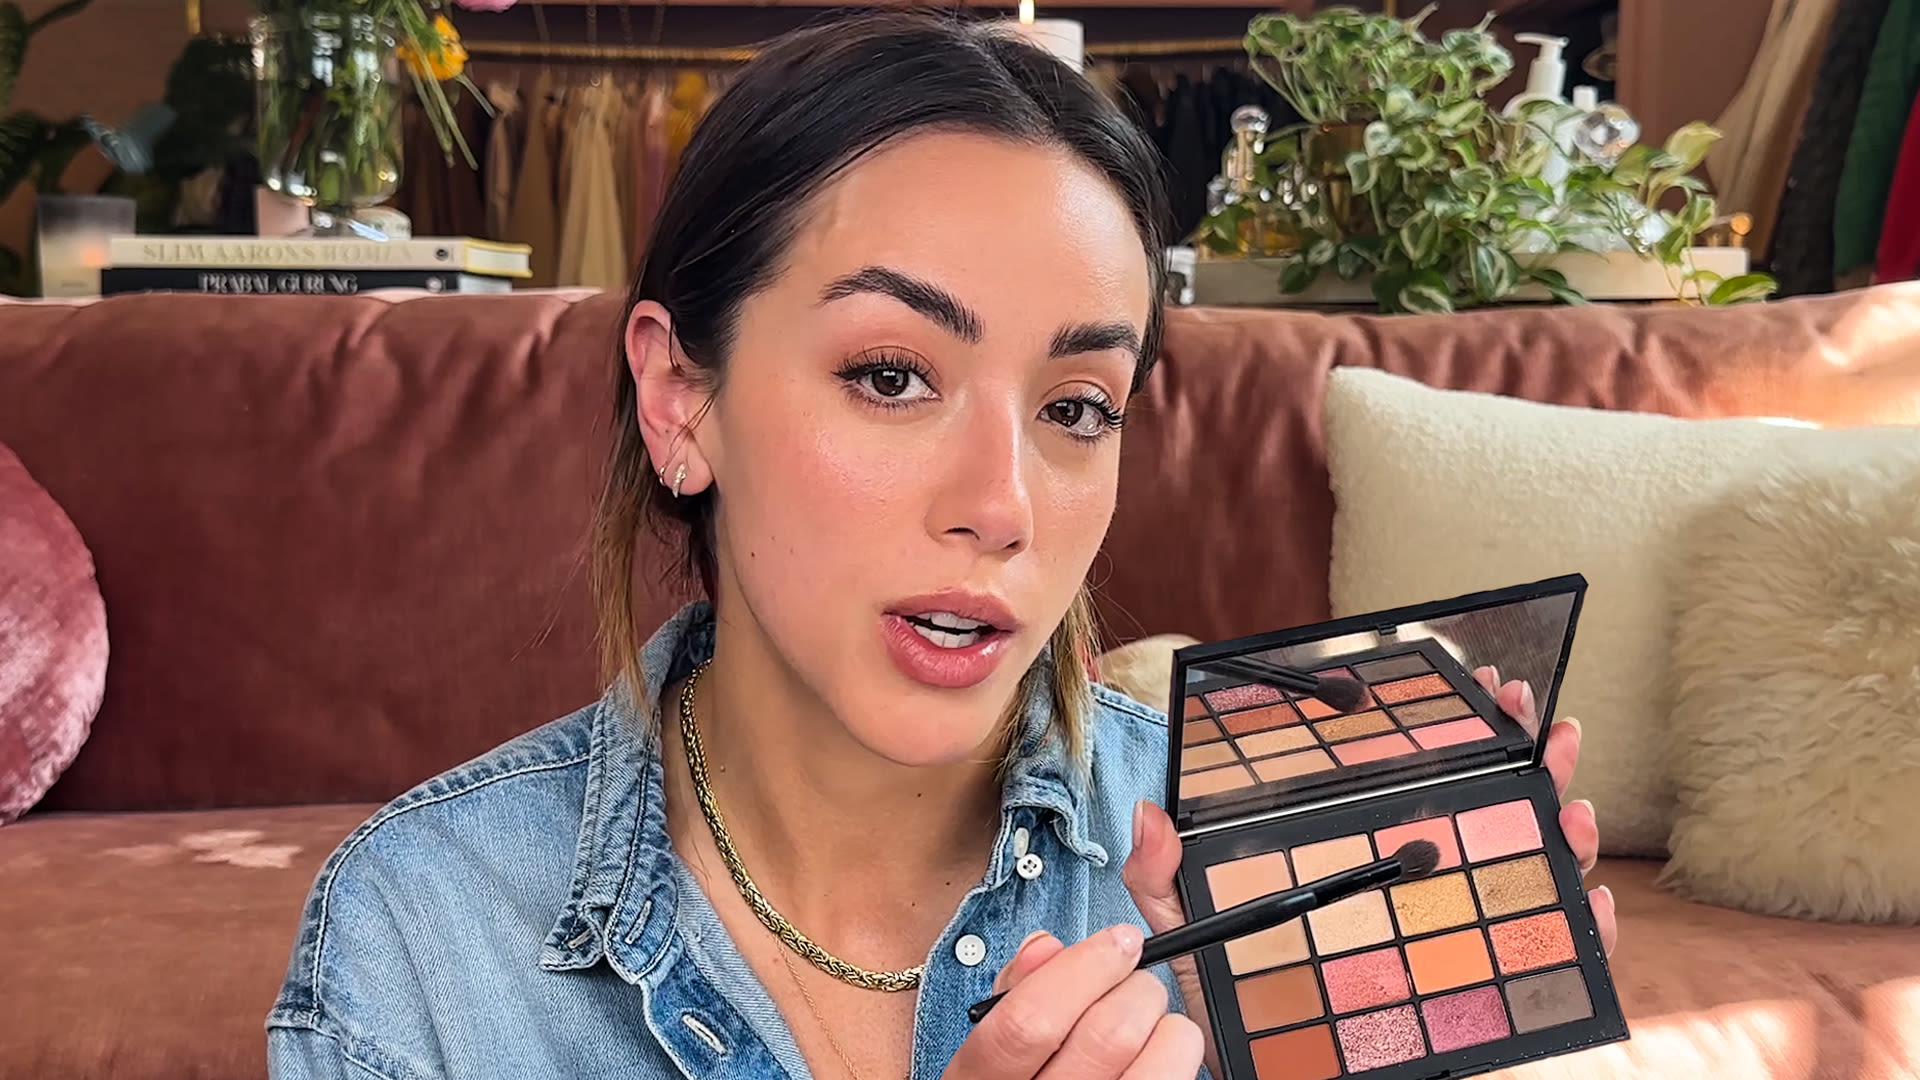 Watch Chloe Bennet's 10-Minute Makeup Routine for a Fresh Spring